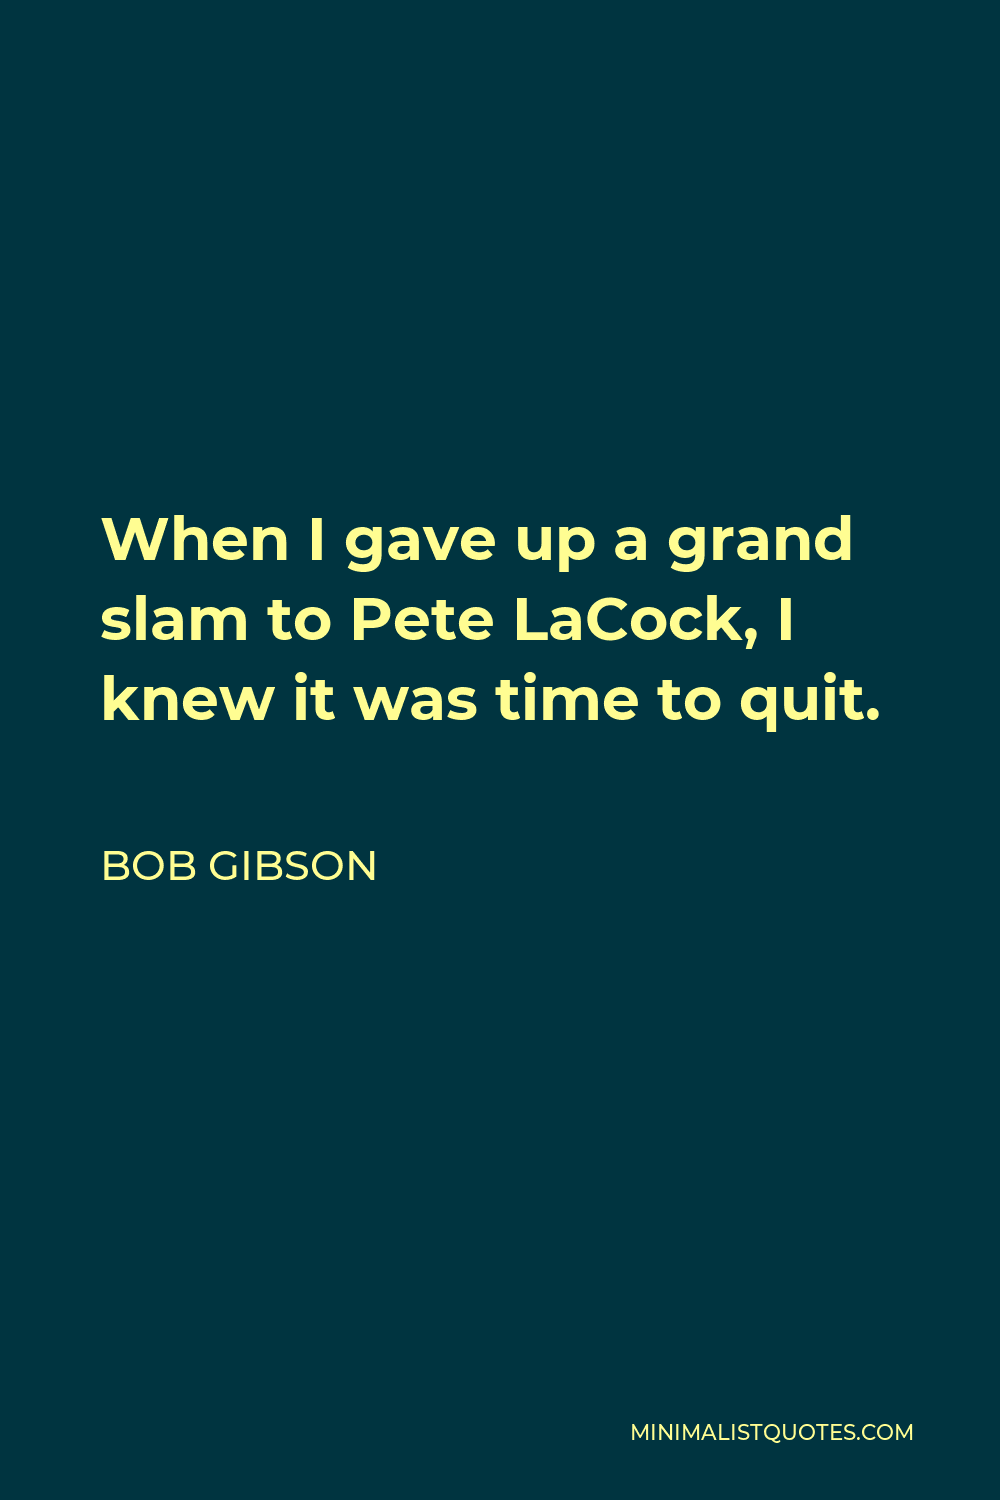 Bob Gibson Quote: “When I gave up a grand slam to Pete LaCock, I knew it